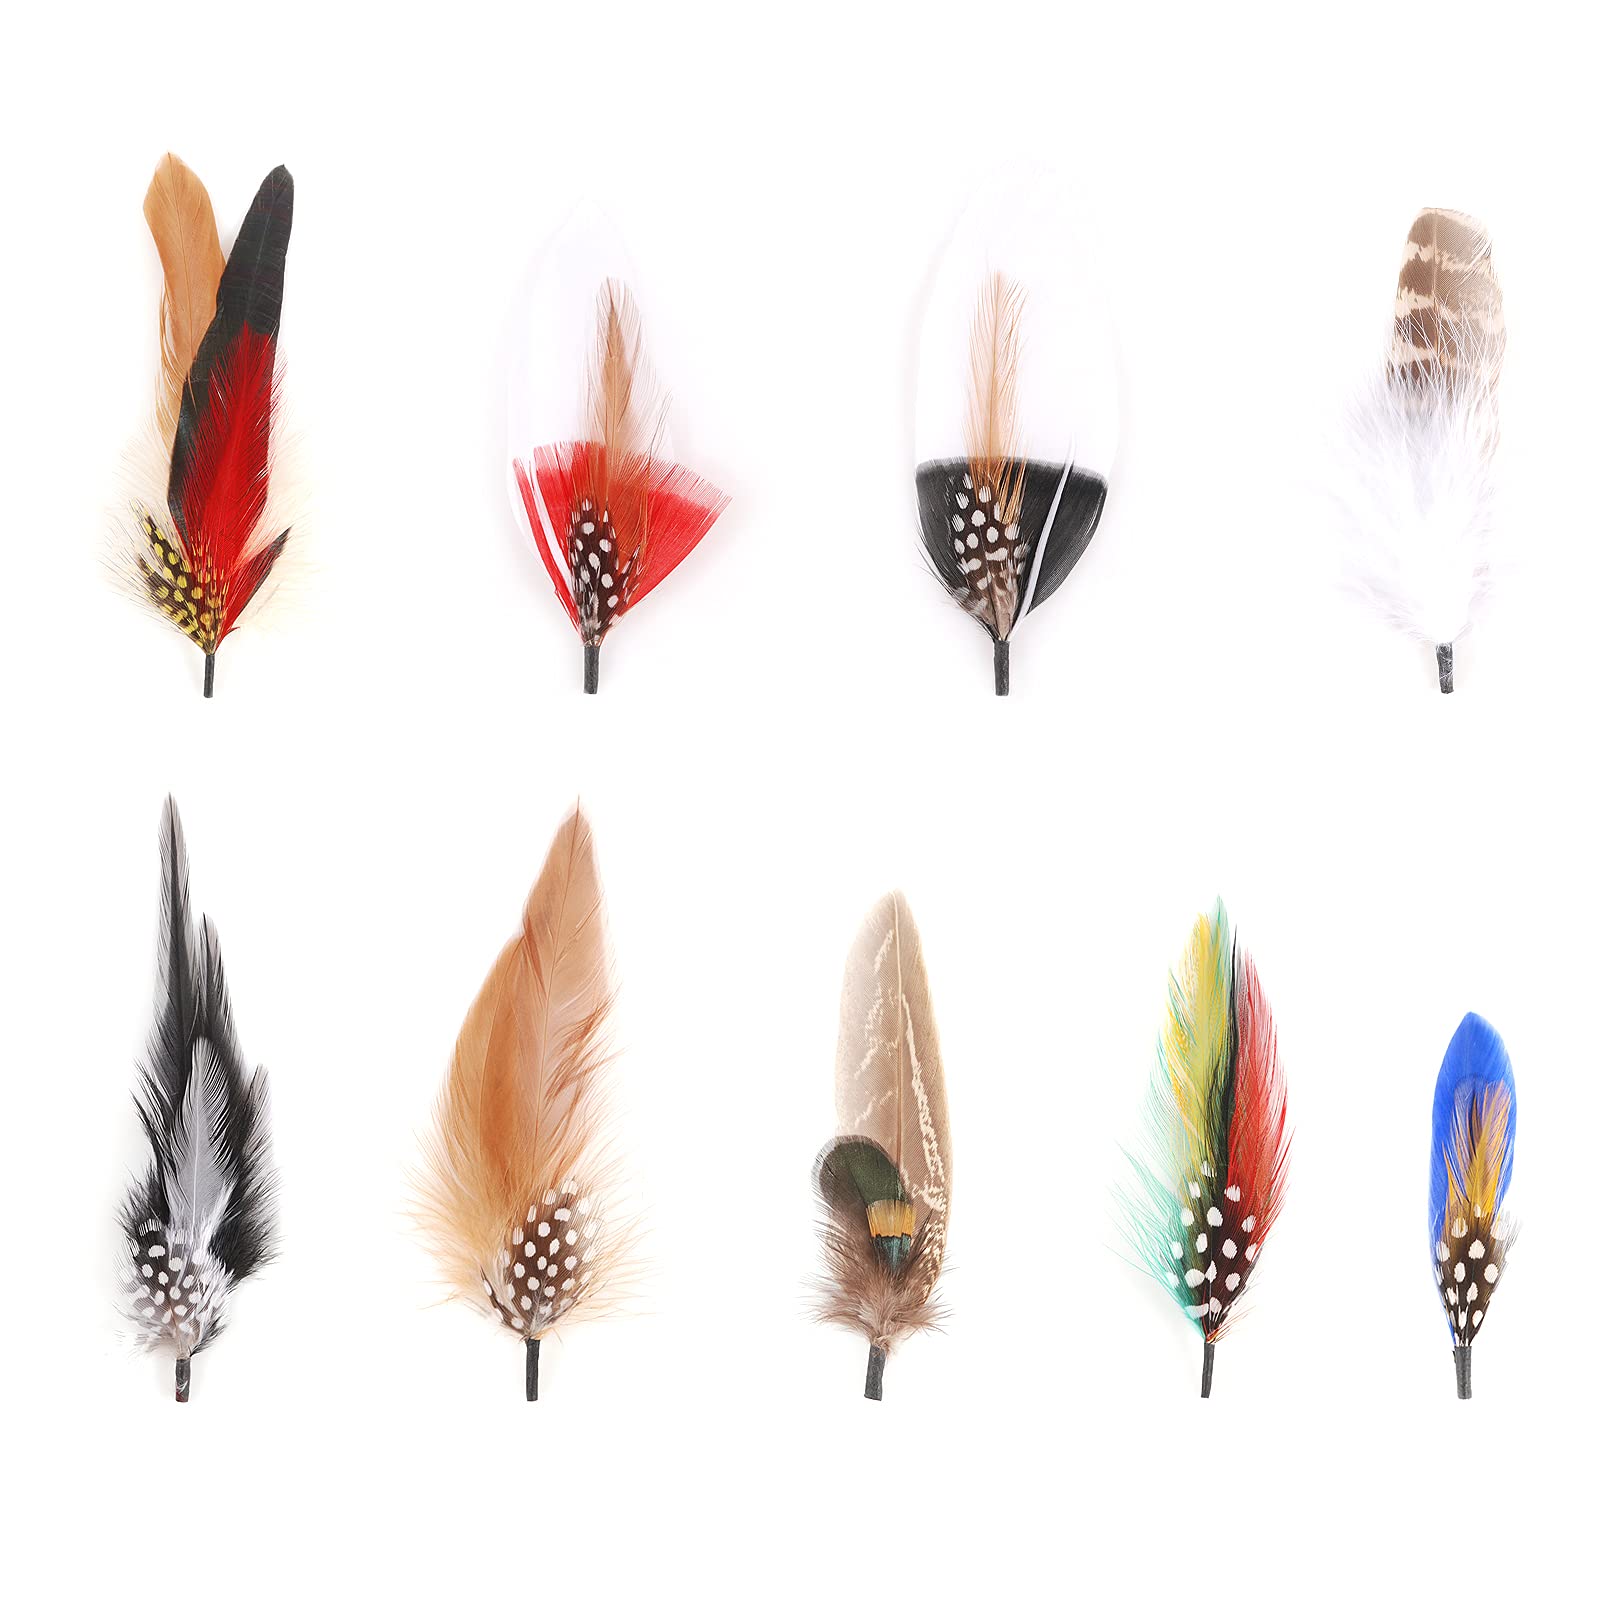 Hat Feathers 9 Pcs Assorted Natural Feather Packs Accessories for Fedora  Cowboy Open Road Borges Scott